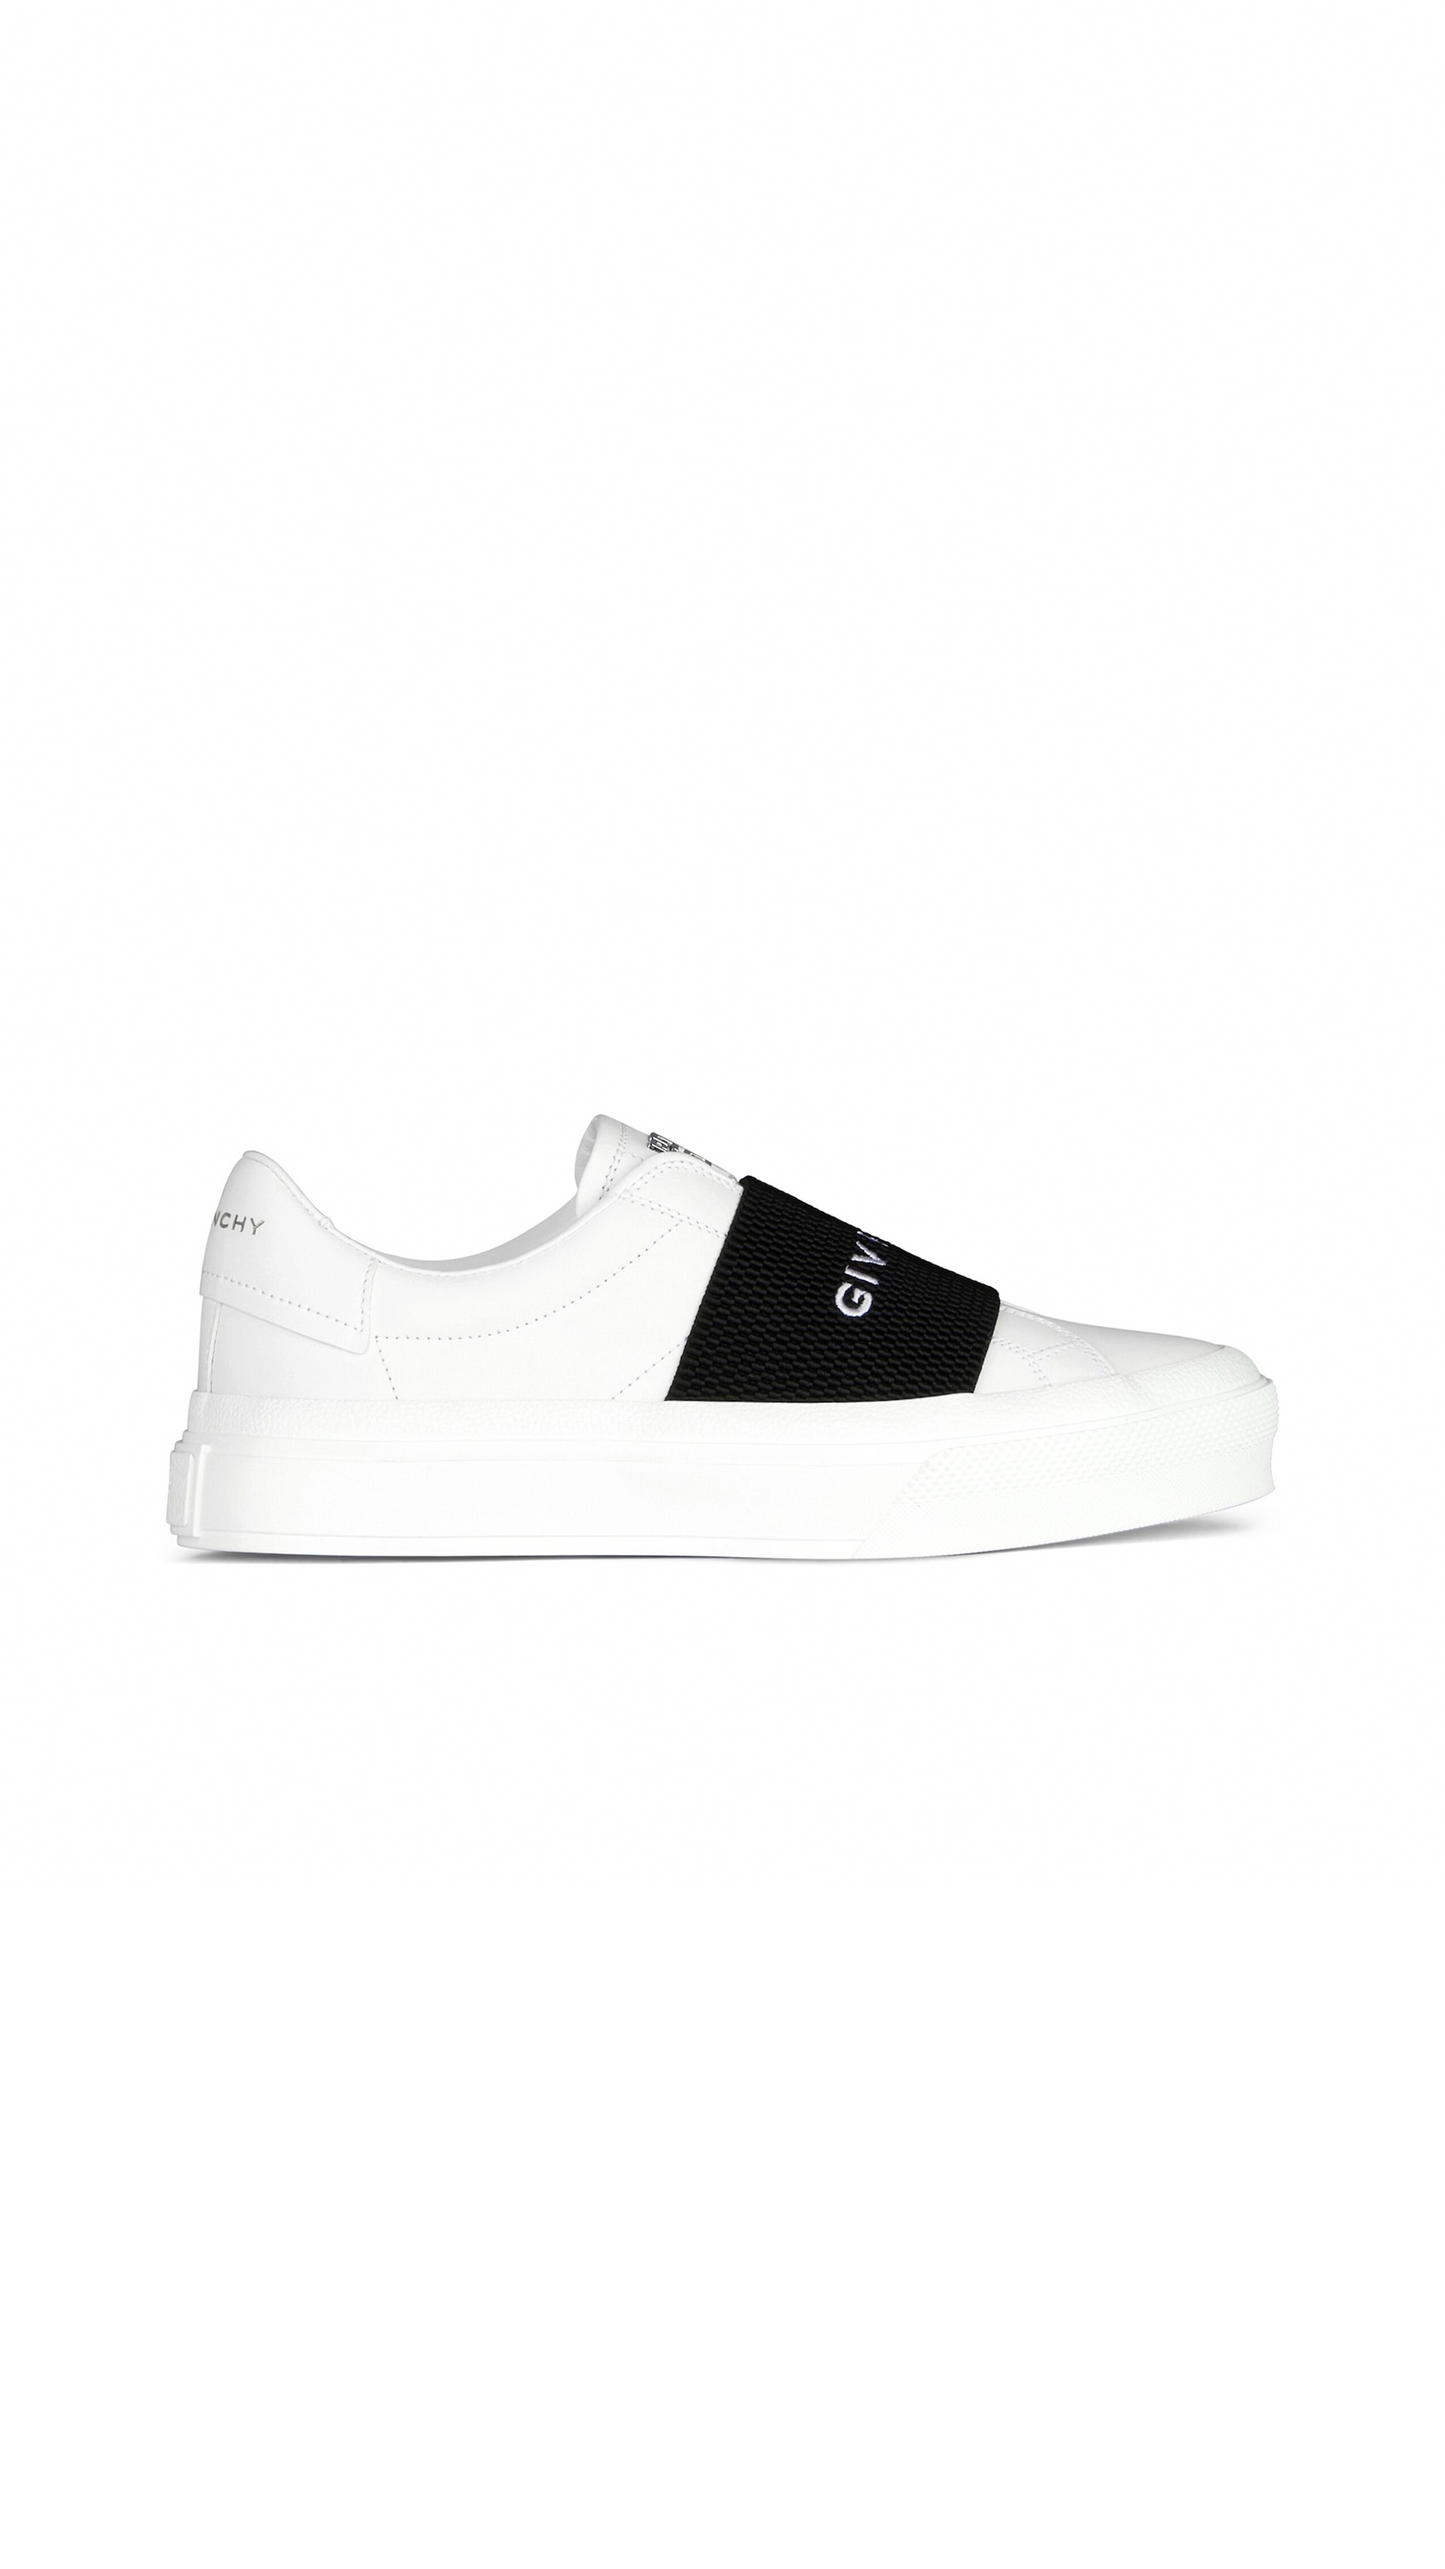 Sneaker In Leather With Webbing - White / Black